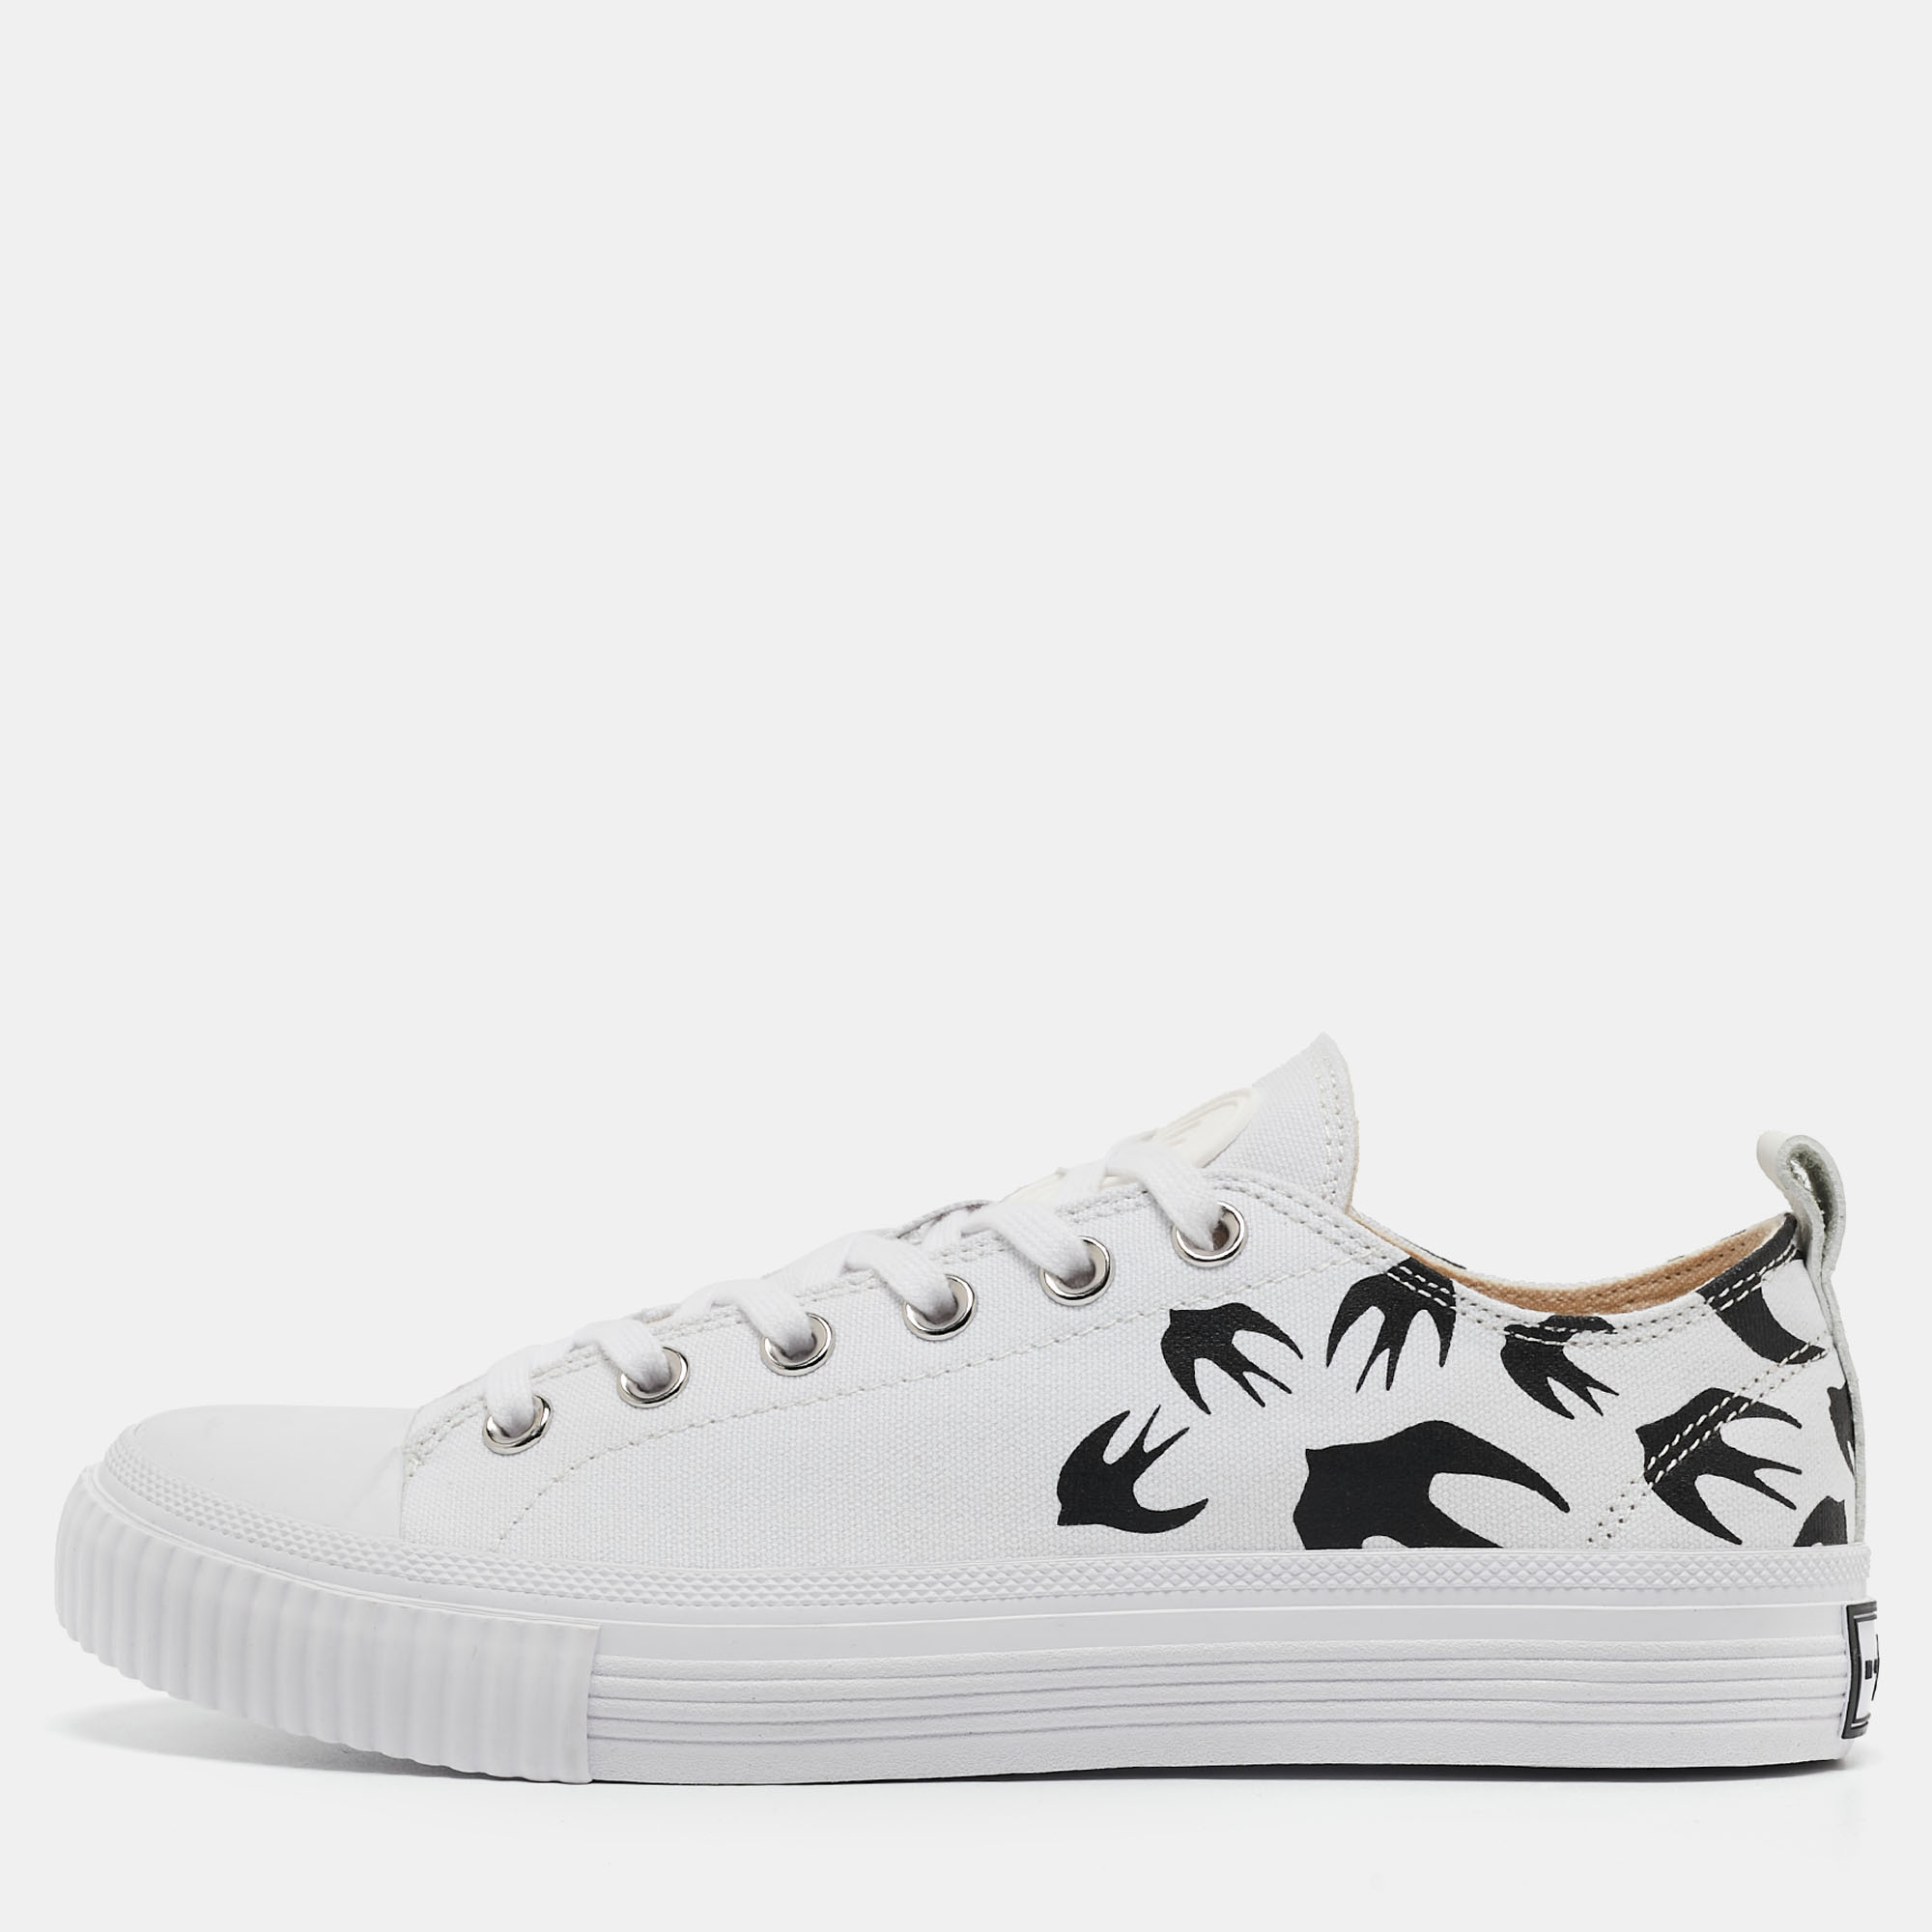 

McQ by Alexander McQueen White/Black Canvas Shallow Swarm Sneakers Size